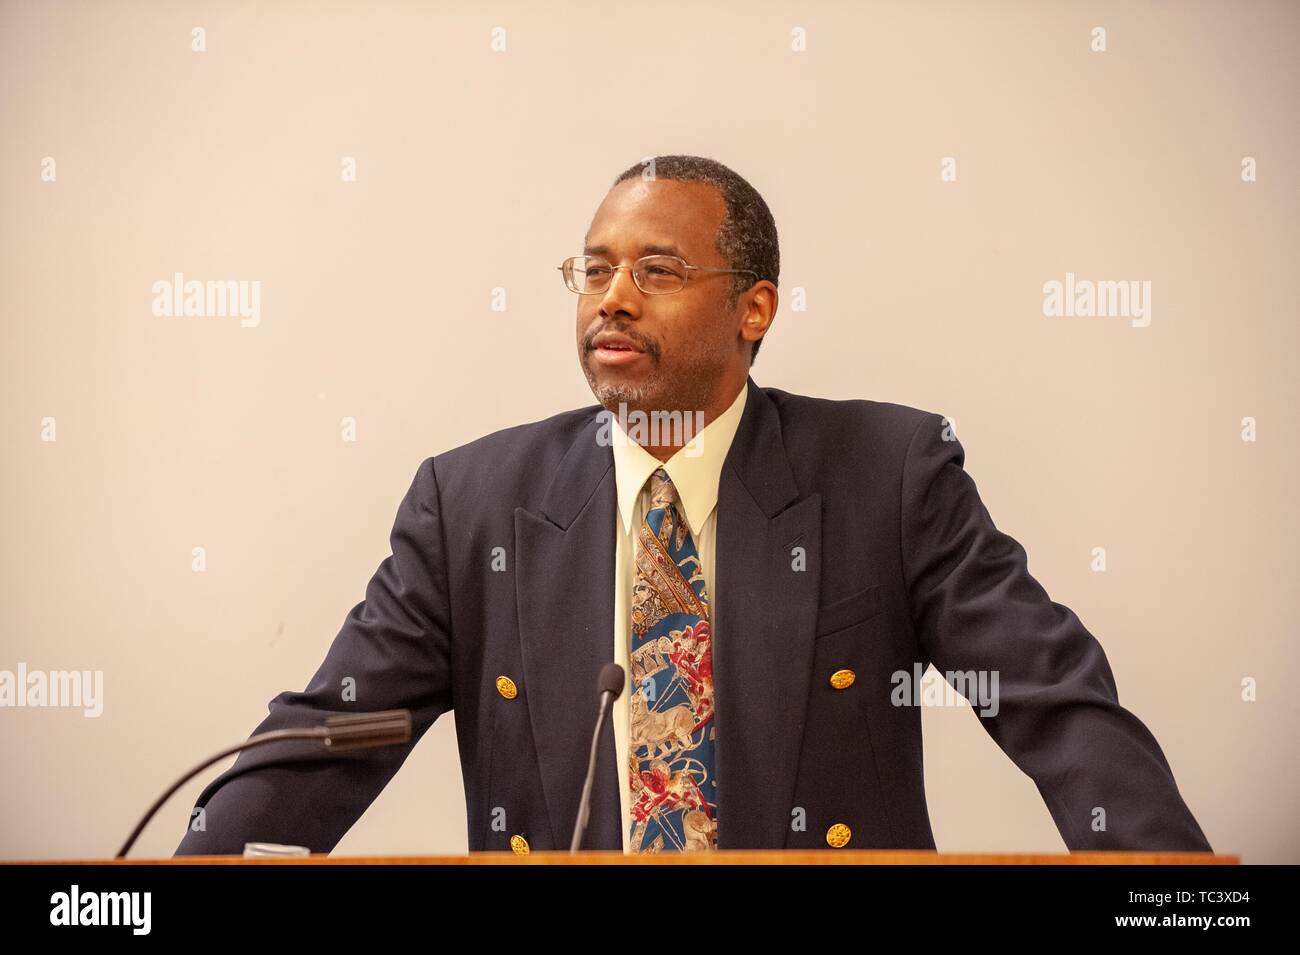 Neurosurgeon and politician Ben Carson speaking from a podium during the Minority Pre-Health Conference at the Johns Hopkins University, Baltimore, Maryland, February 29, 2008. From the Homewood Photography Collection. () Stock Photo